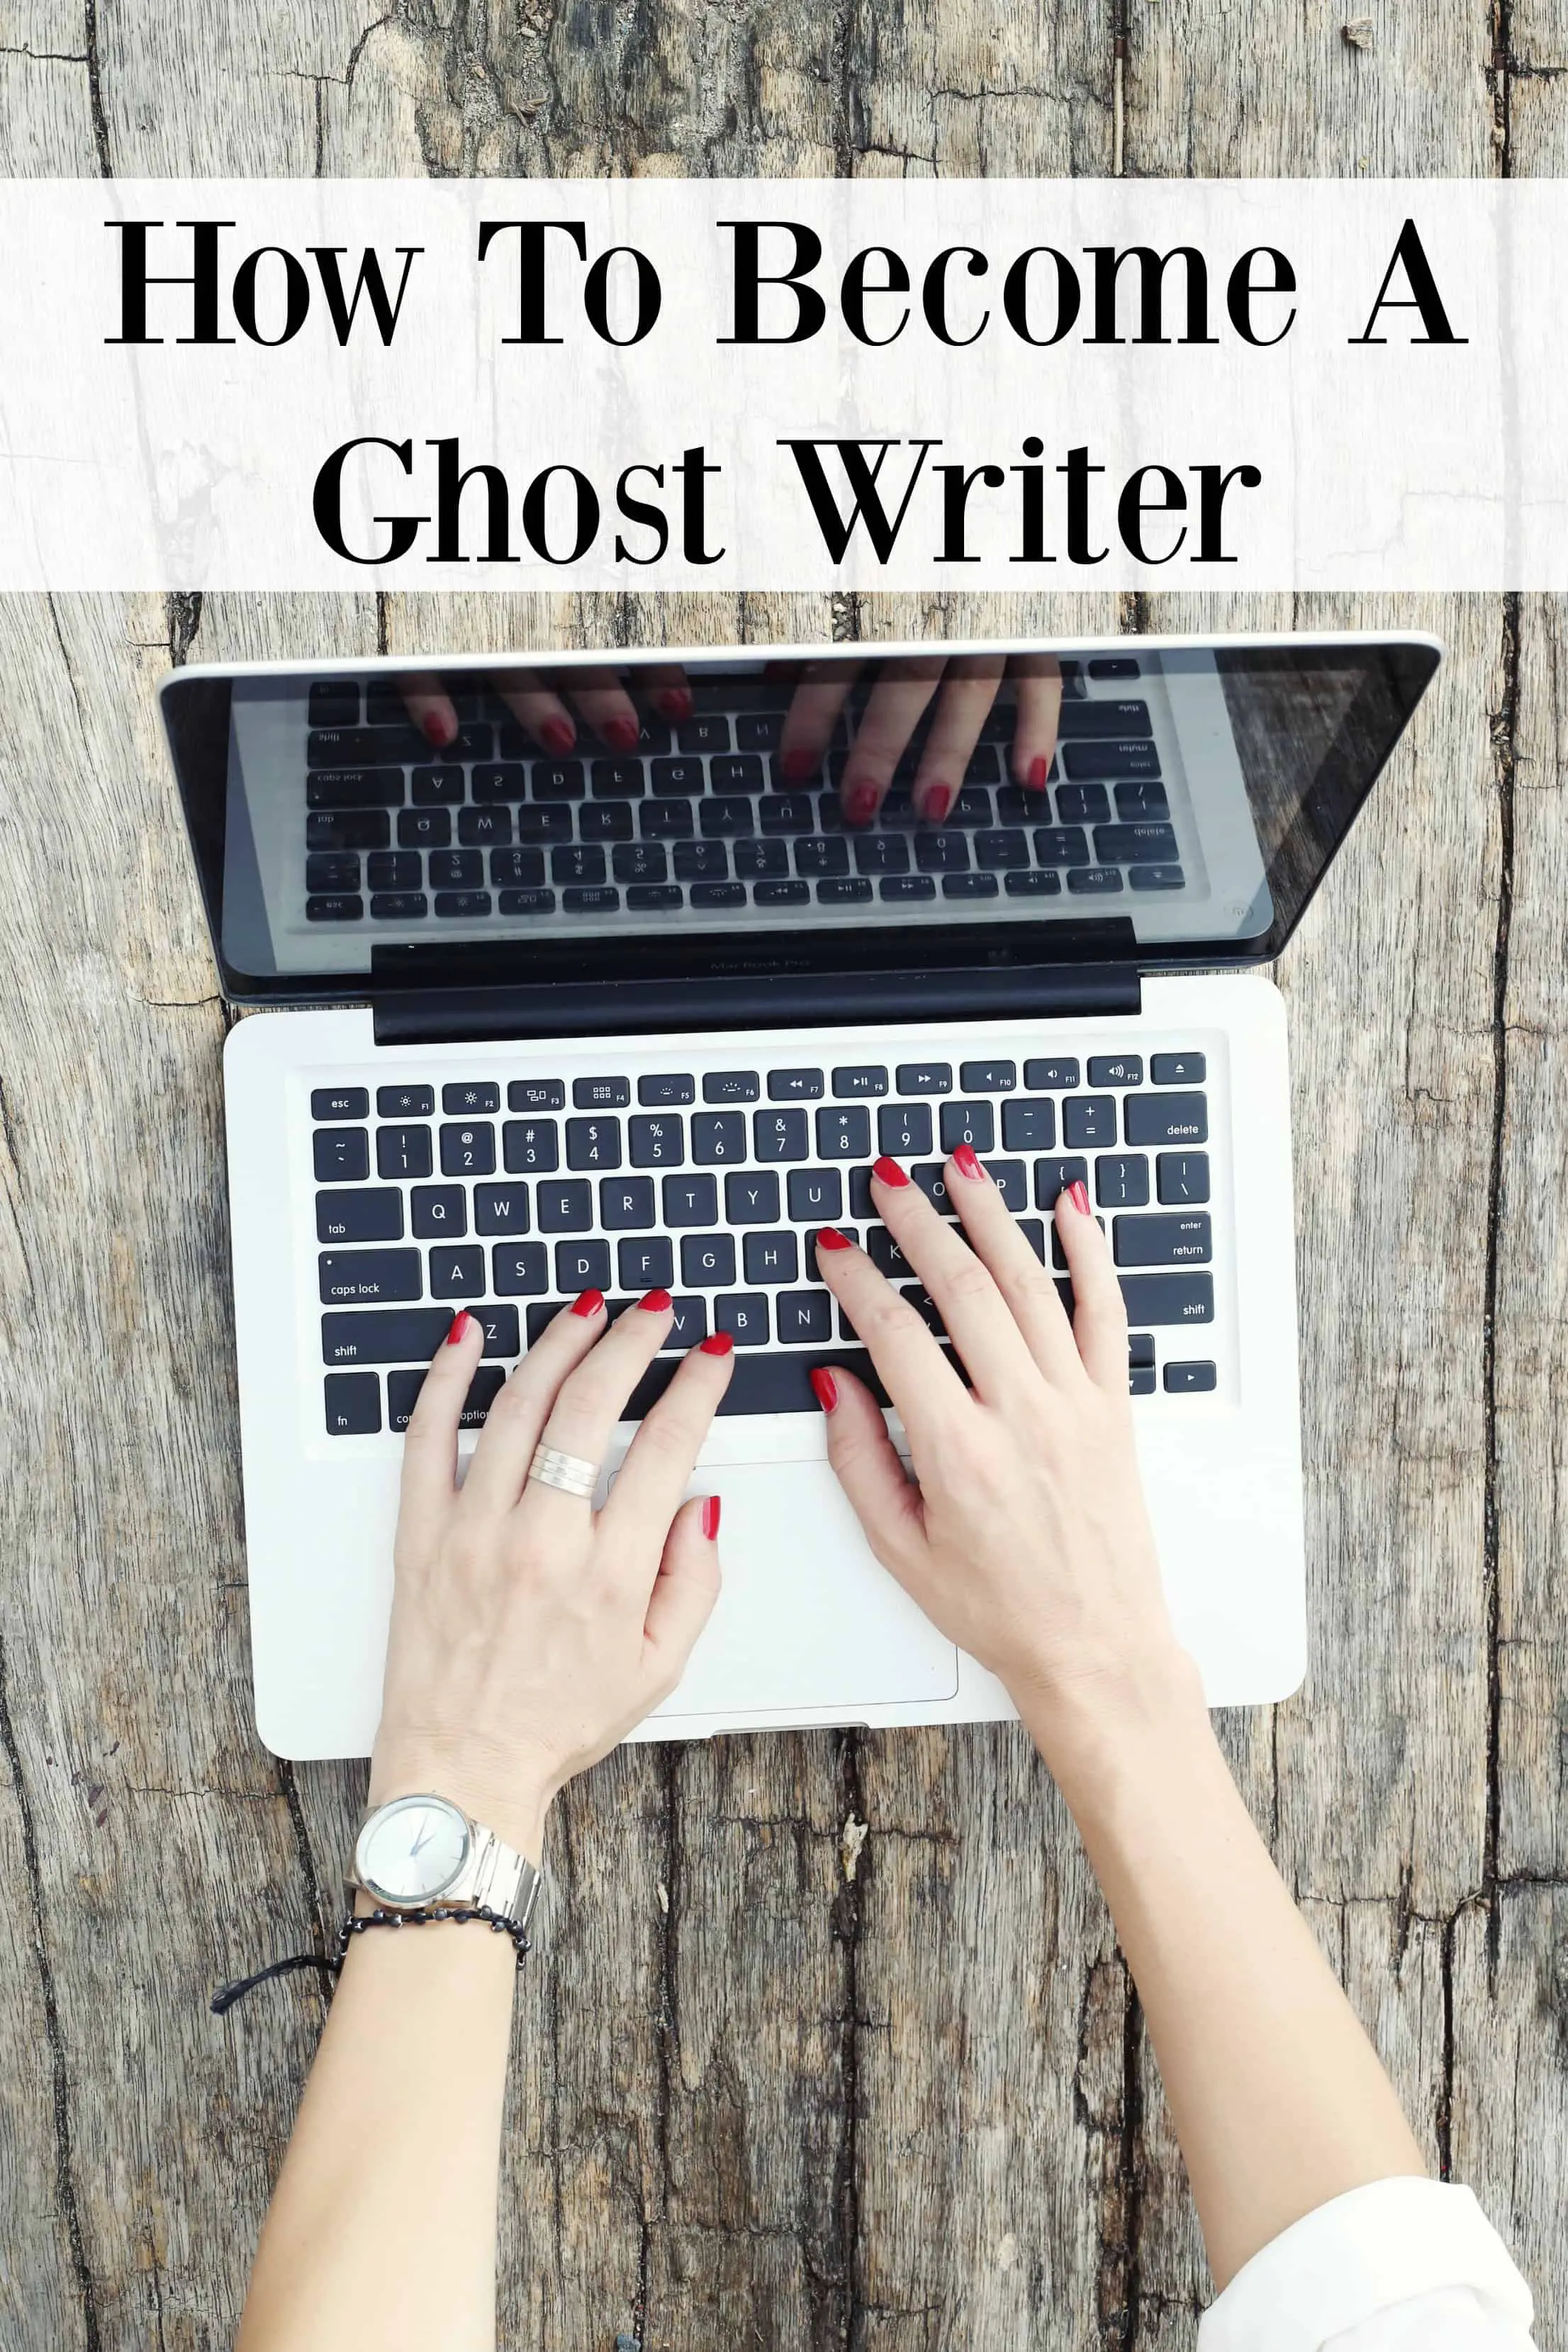 Becoming a ghost writer is one of the most popular ways to earn money from home as a virtual assistant or freelance writer.